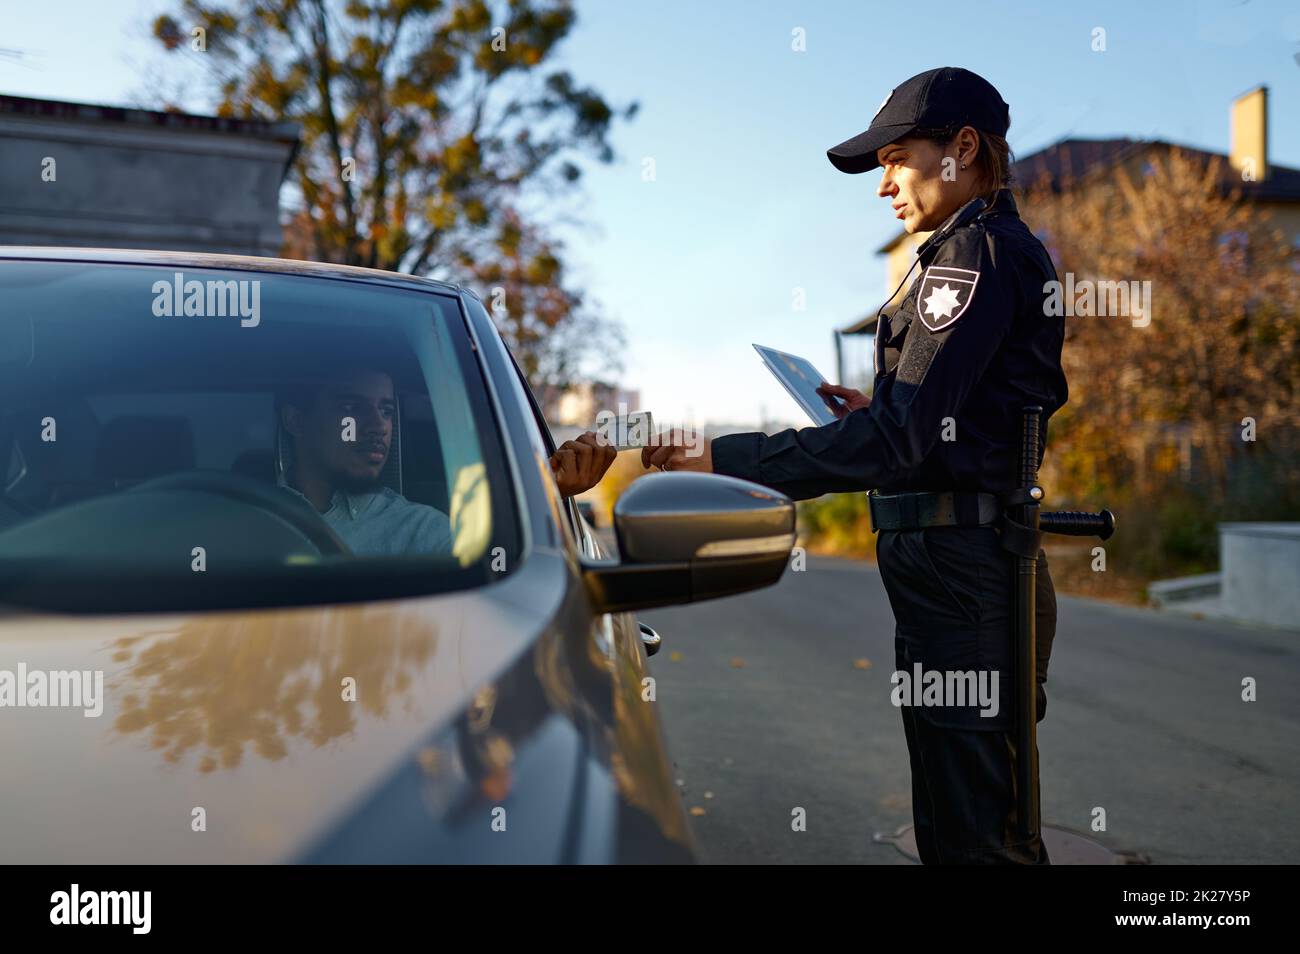 Policewoman stop car and check driver license Stock Photo